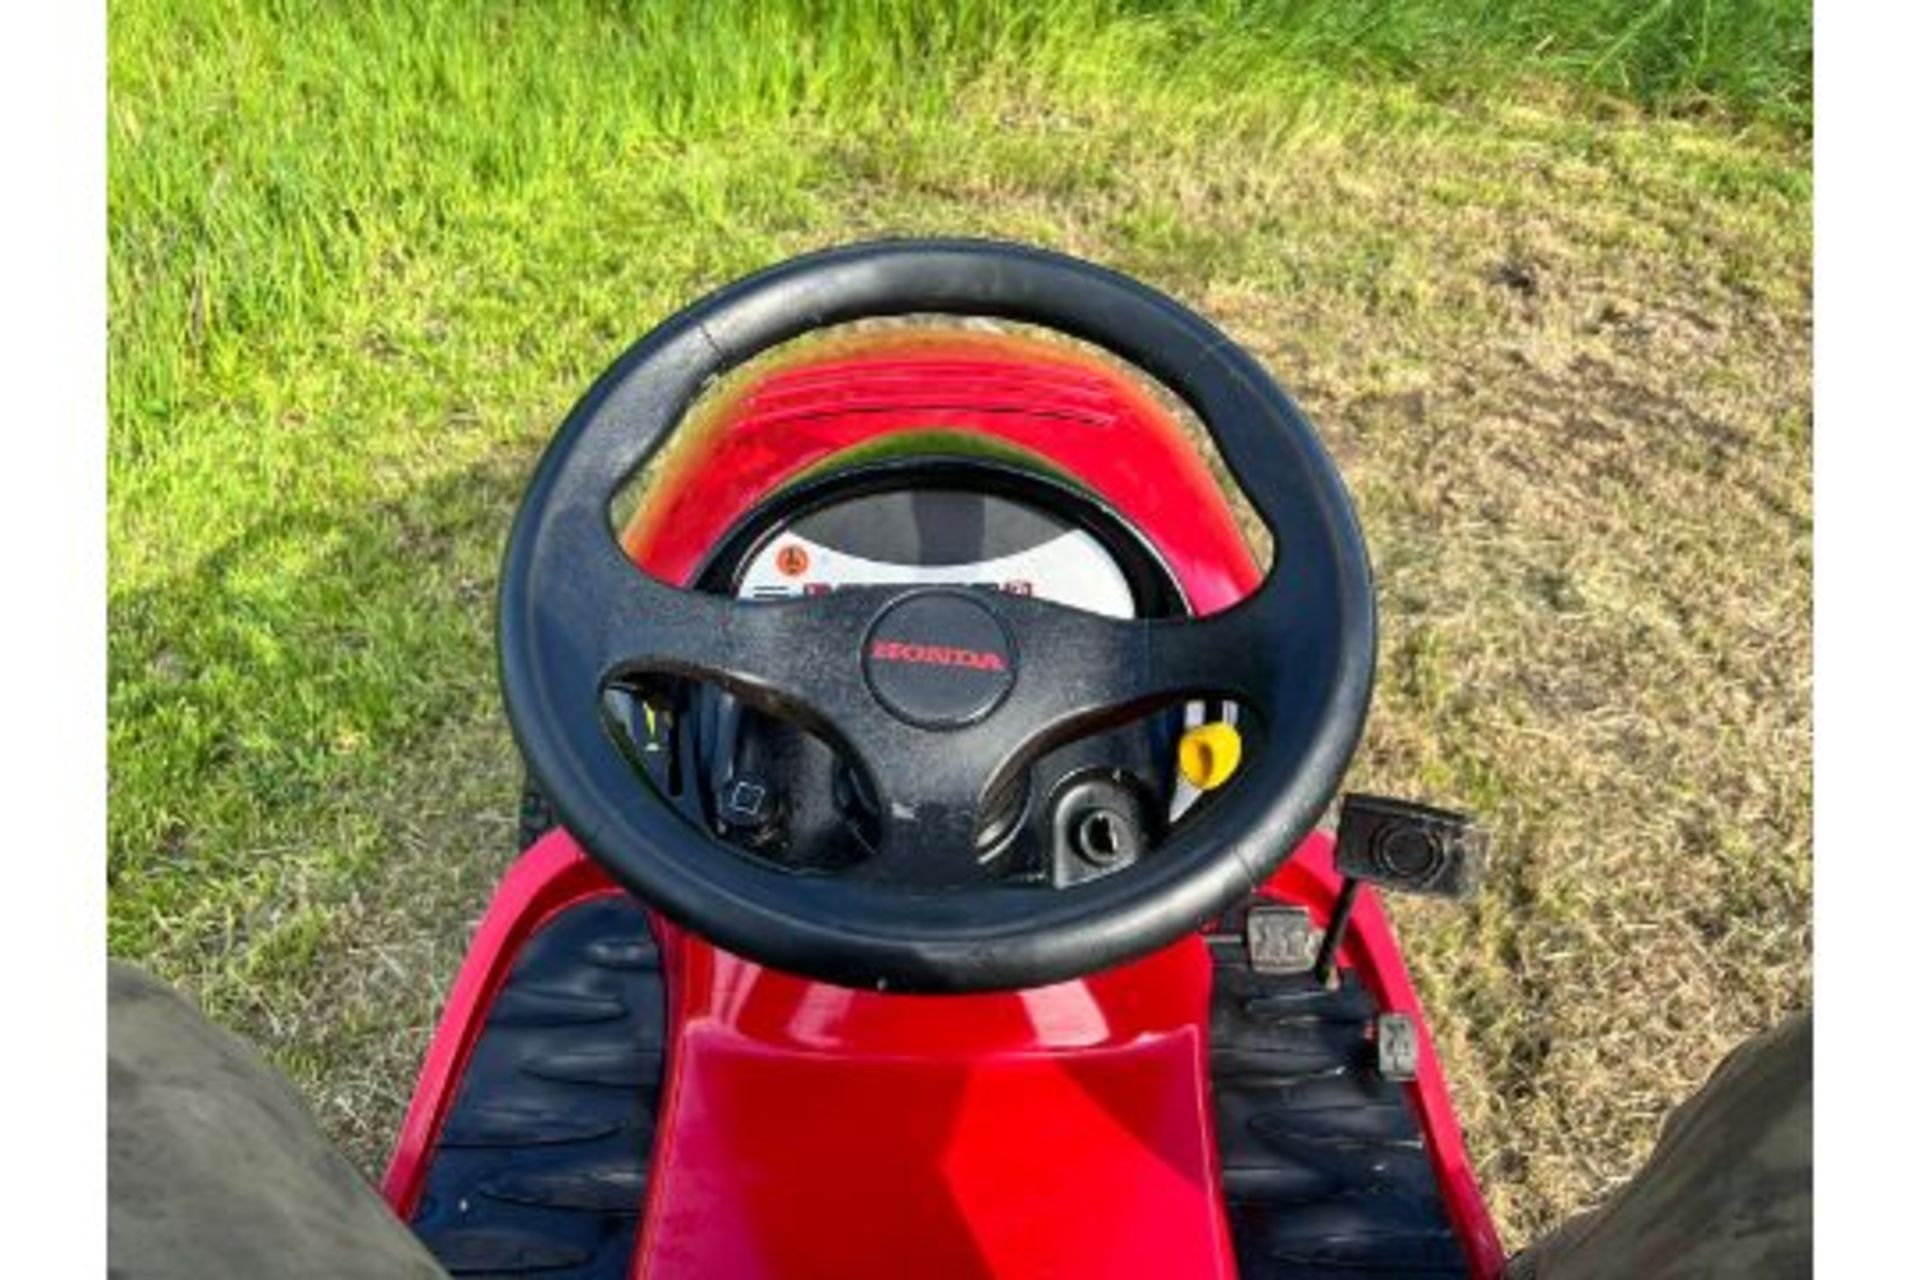 Honda 2417 Ride On Mower With Rear Collector, Runs Drives Cuts And Collects "PLUS VAT" - Image 12 of 22